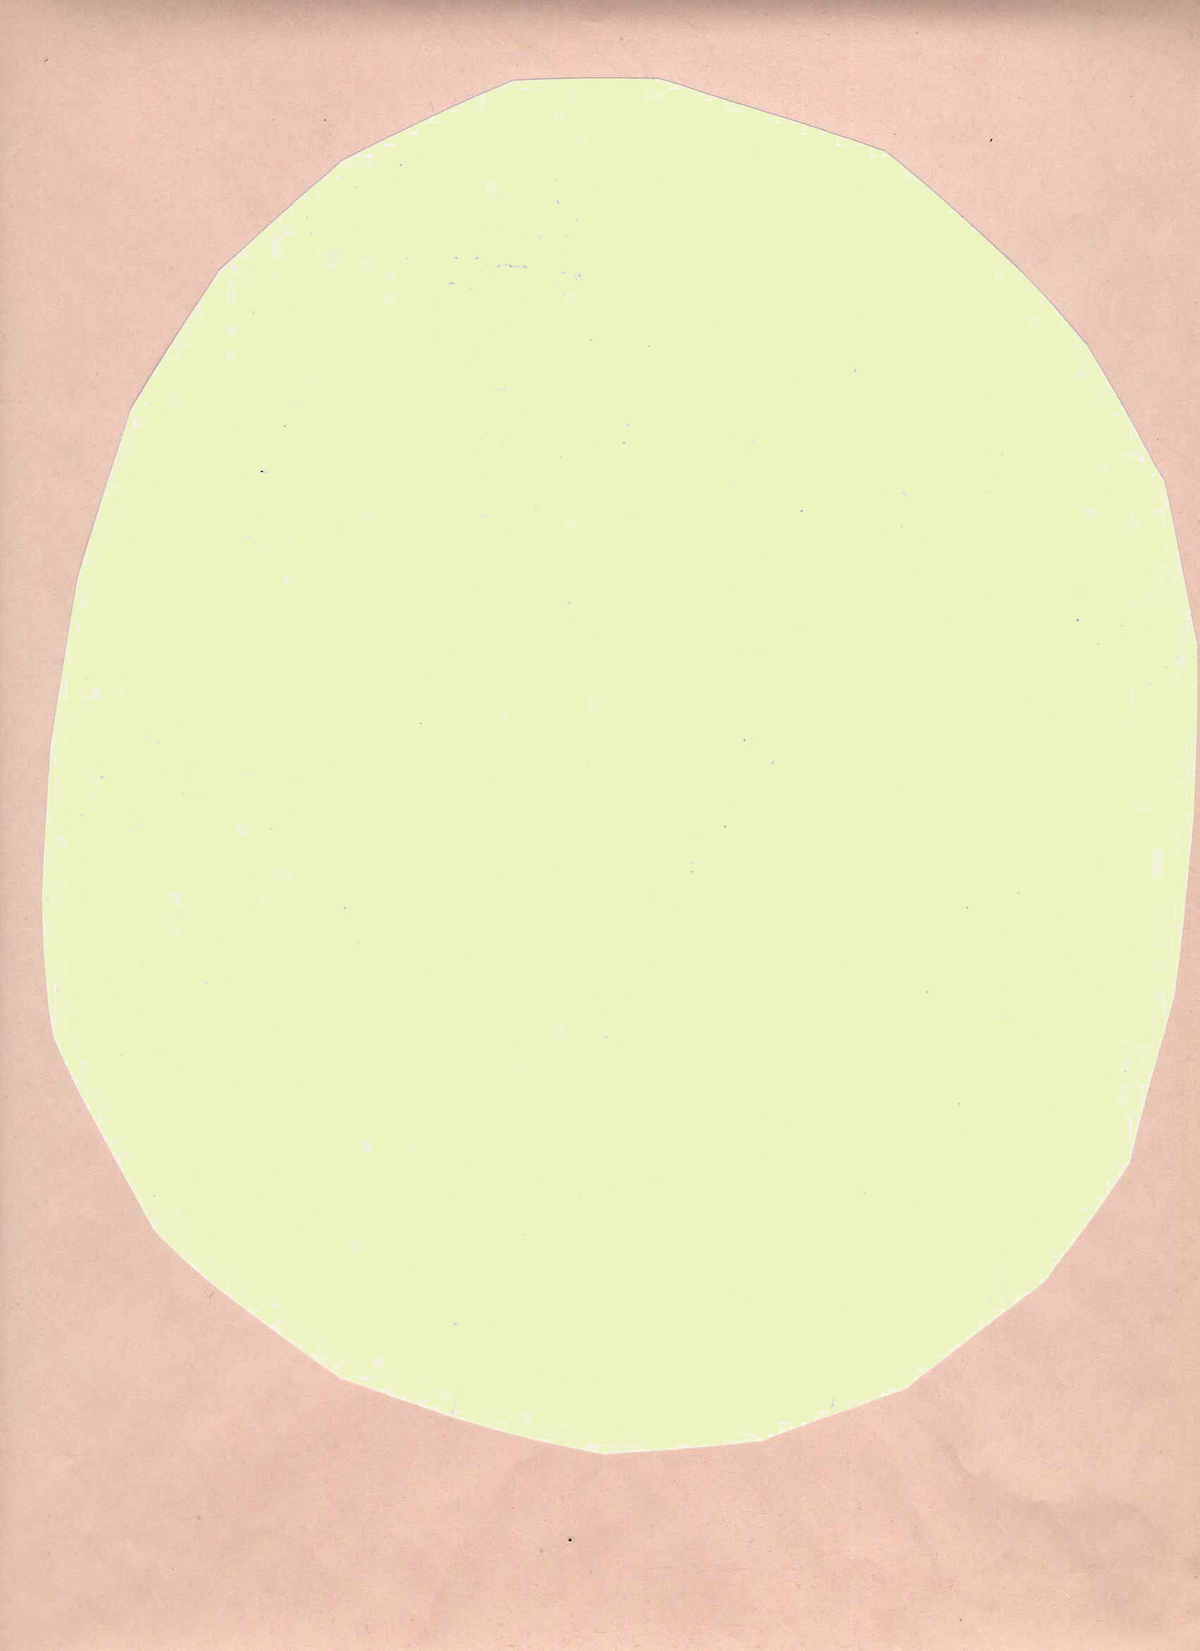 A large oval-shaped cutout of yellow paper against a light salmon pink background. The image flips upside-down when the cursor hovers over it.